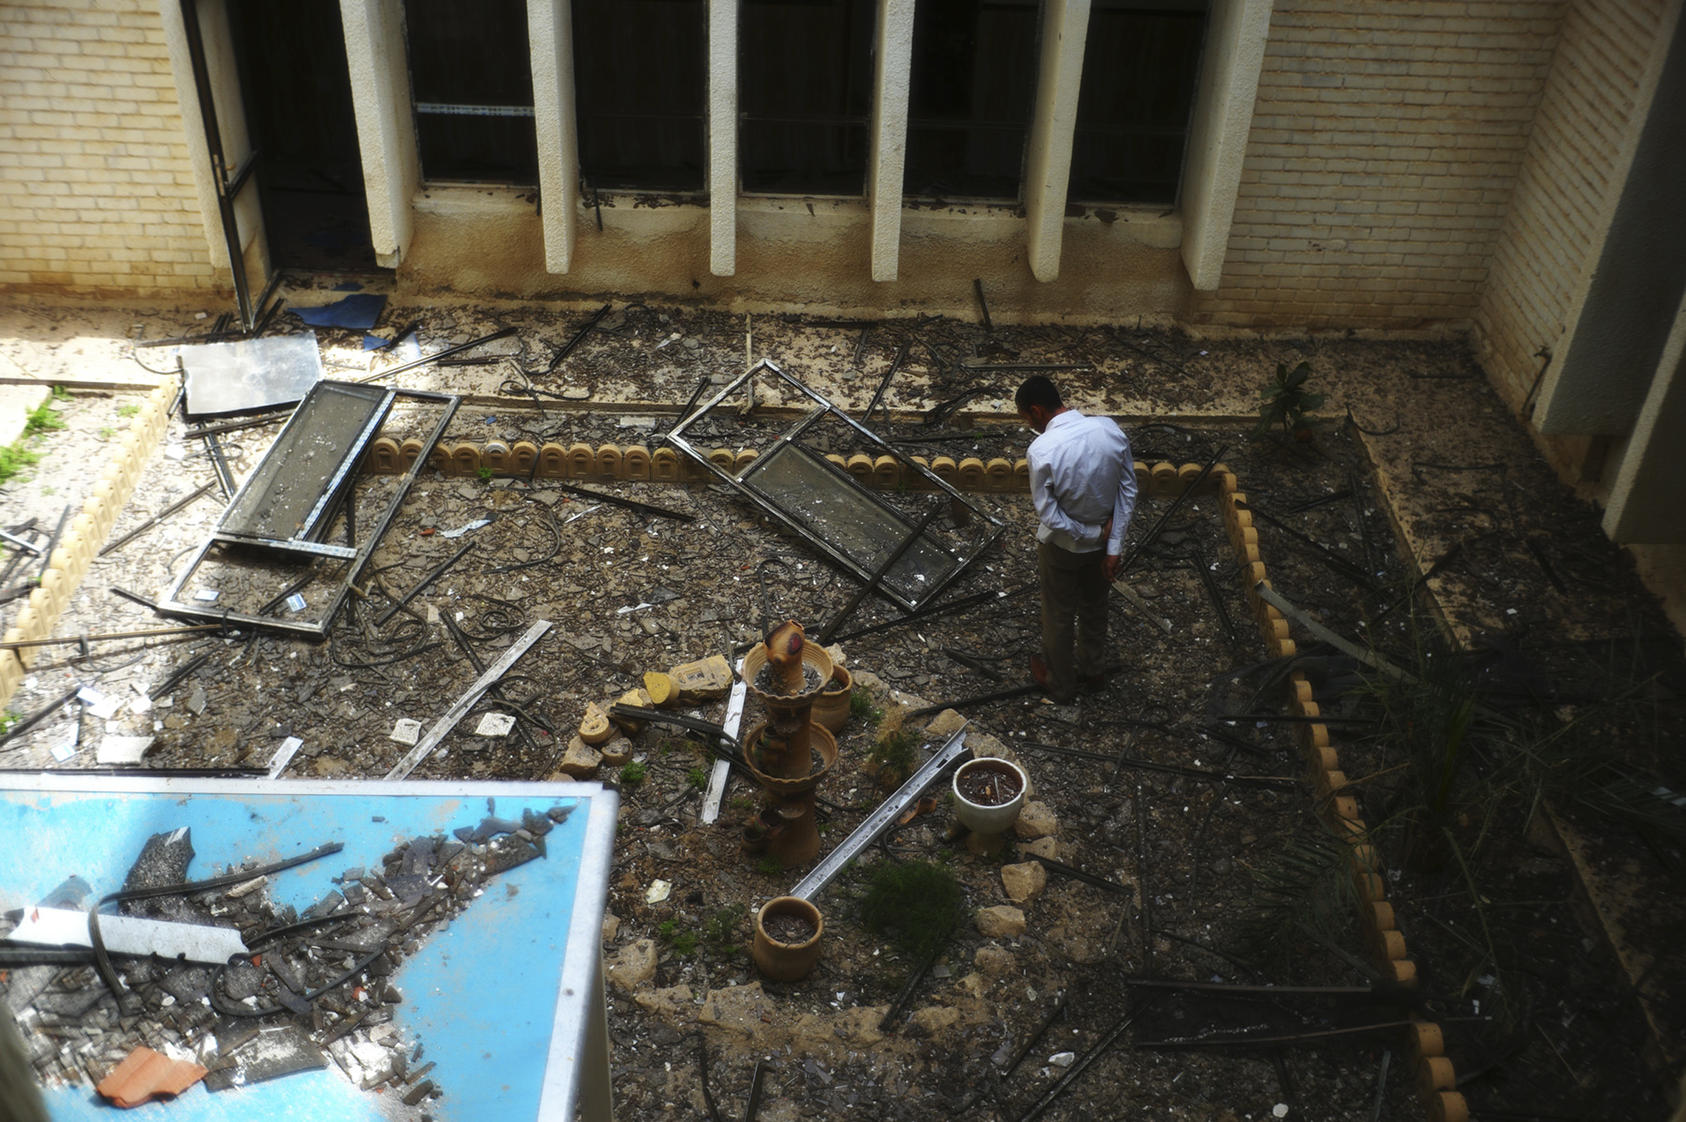 A man in a damaged courtyard at the provincial council headquarters after terrorists attacked the building last Tuesday in Tikrit, Iraq, April 3, 2011. Nearly 60 died and more than 90 were wounded in last Tuesday’s brazen attack, which turned into a hostage standoff until Iraqi security forces retook the building. 